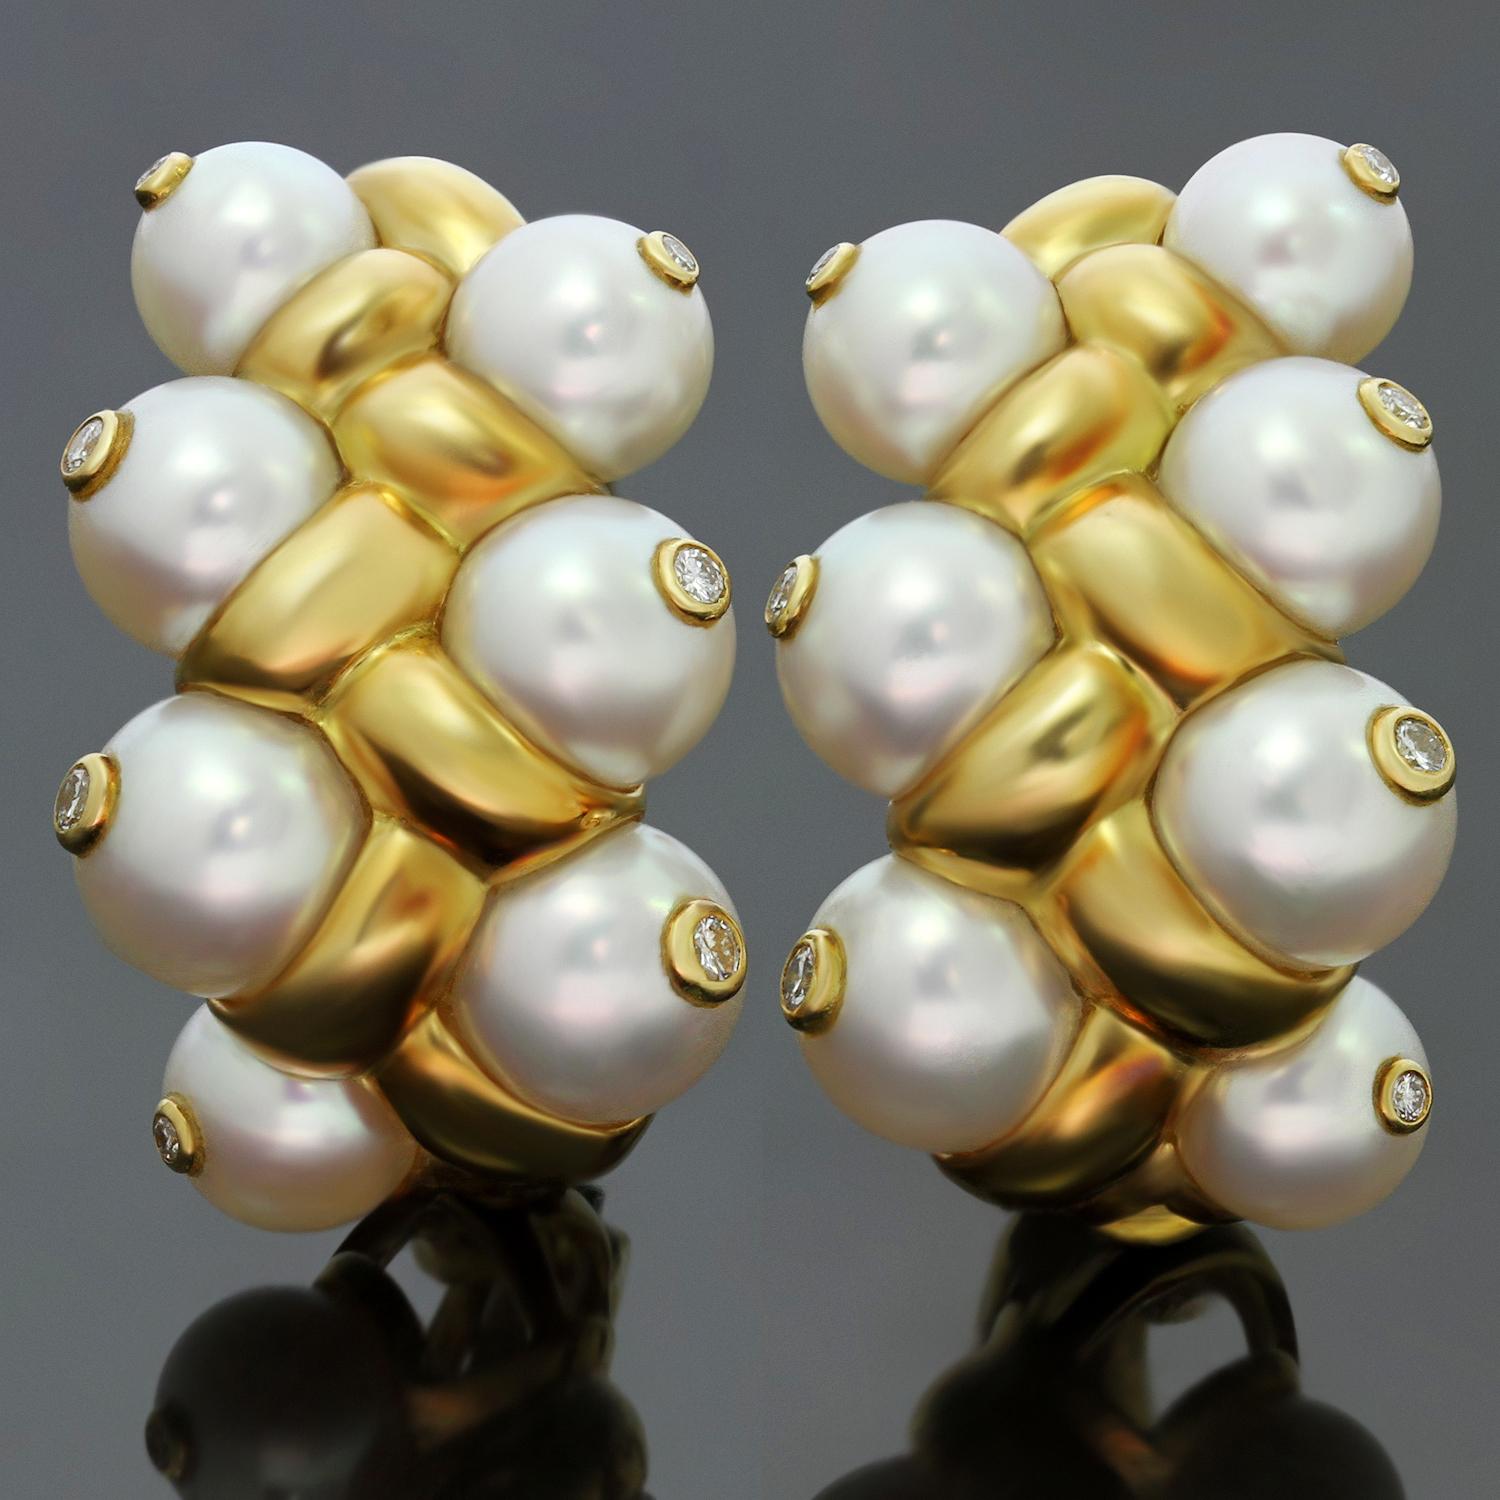 These gorgeous clip-on earrings are crafted in 18k yellow gold and feature clusters of cultured pearls ranging in size from 7.00mm to 8.65mm and accented with full-cut diamonds weighing an estimated 0.38 carats. The pearls are white and clean with